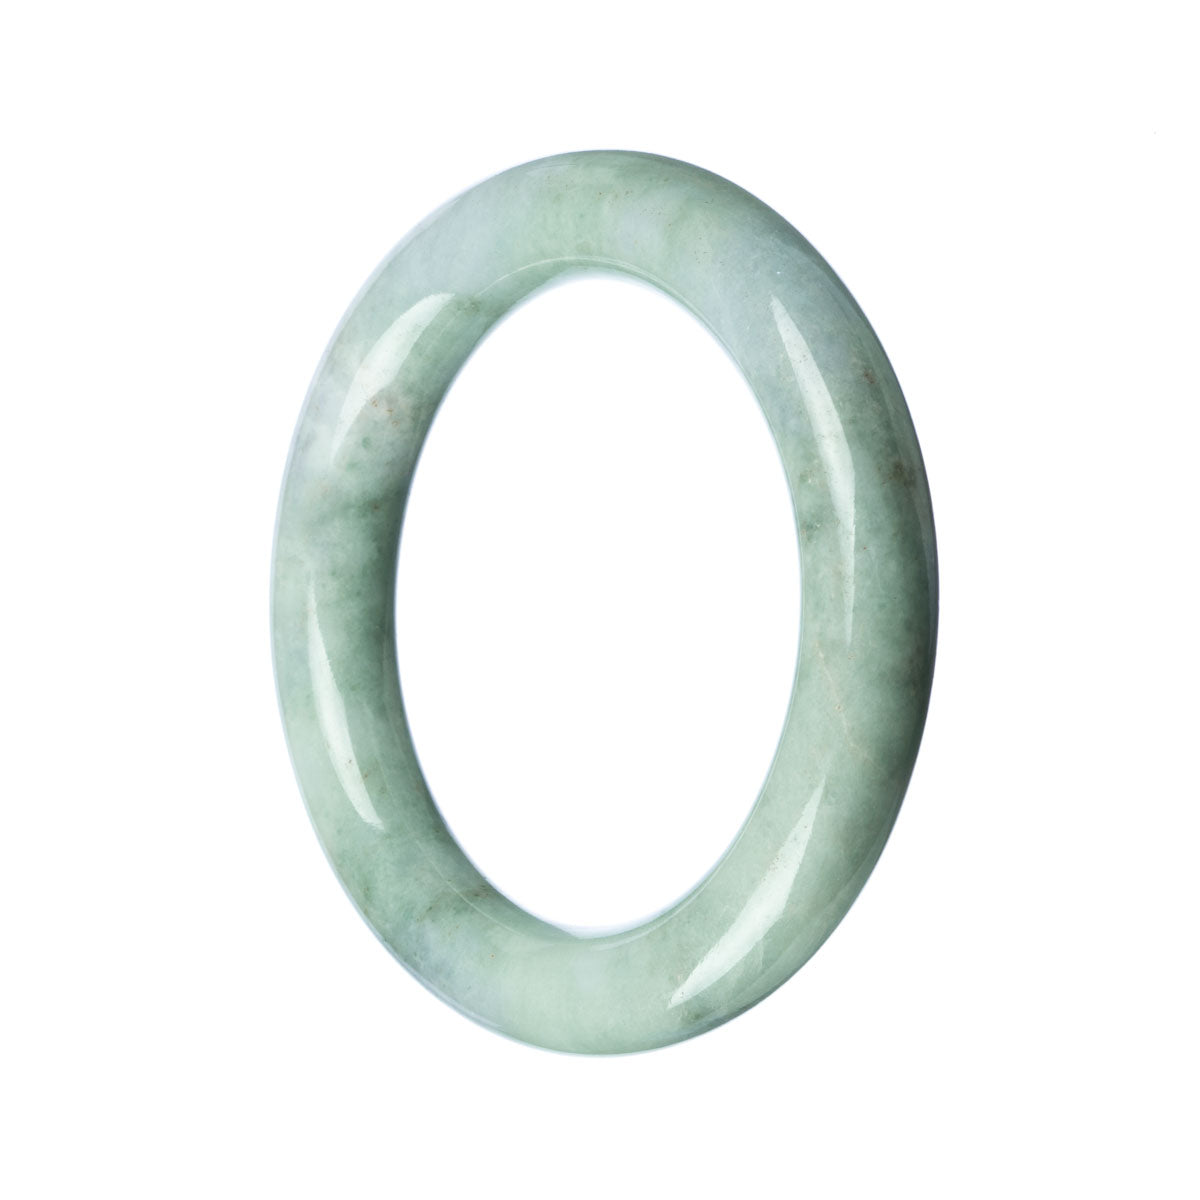 A close-up photo of a round, pale green Burmese jade bracelet. The bracelet is made of real, natural jade and has a smooth, polished surface. It measures 58mm in diameter and has a delicate, elegant design. The jade stone has a soft green color, with subtle variations and a faint translucency. The bracelet is a beautiful piece of jewelry, perfect for adding a touch of natural elegance to any outfit.